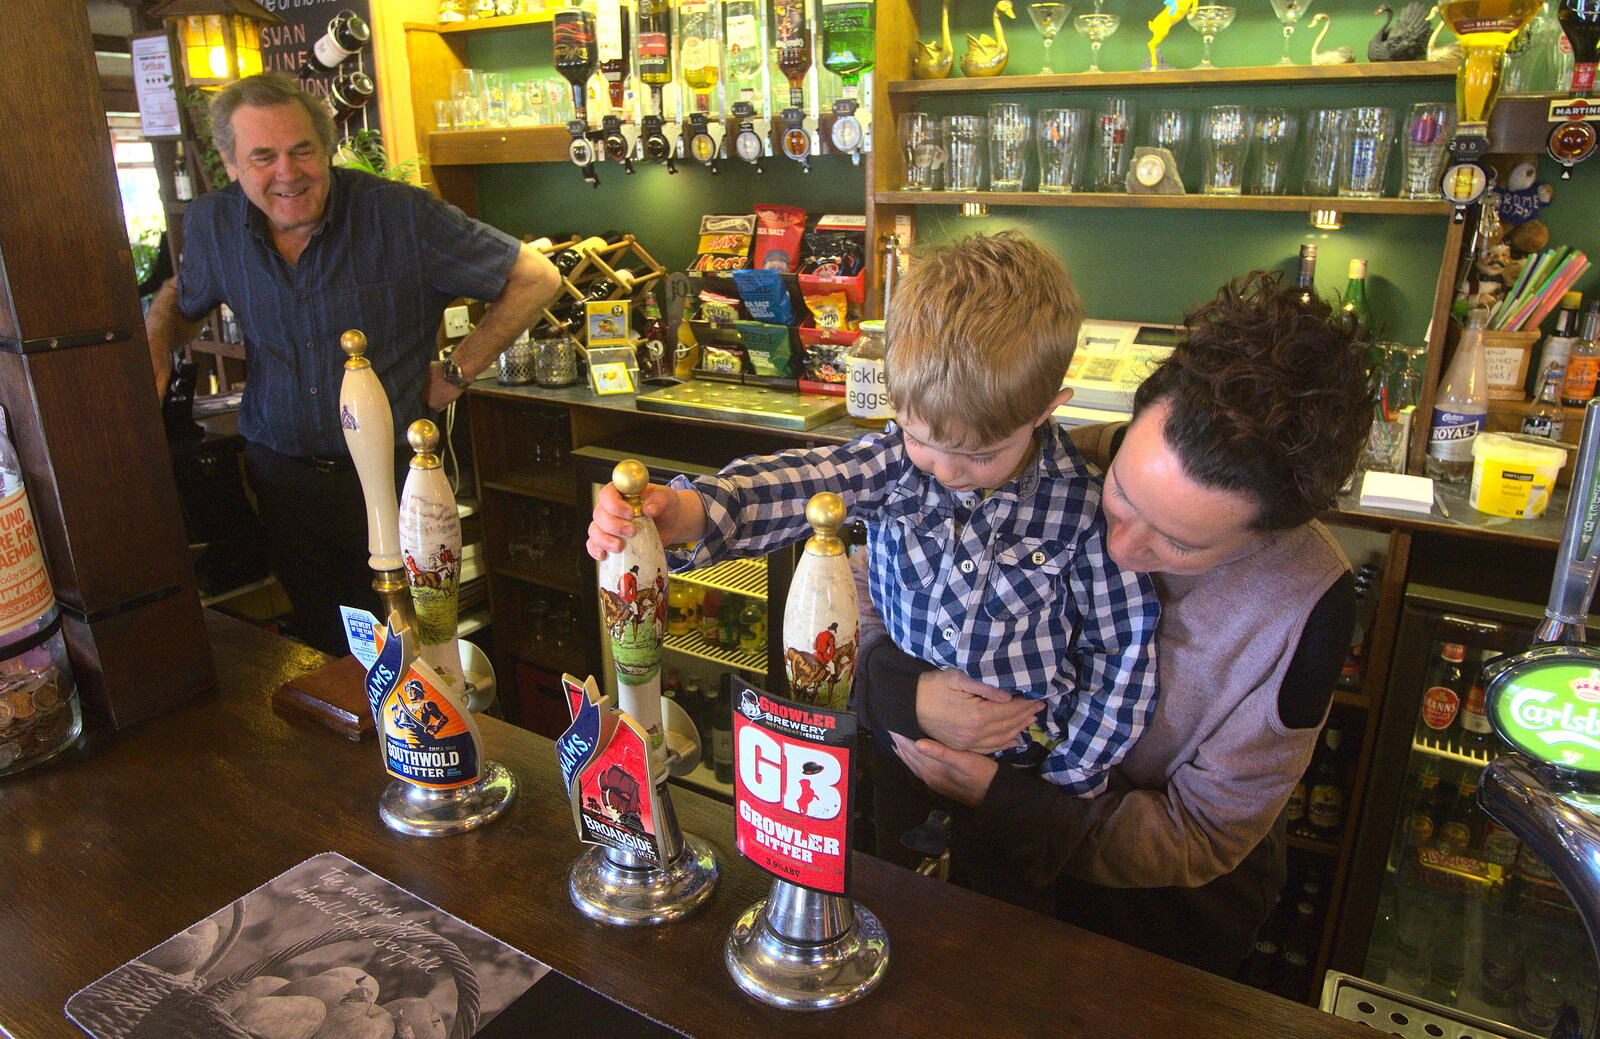 Alan watches as Fred pulls a pint from An Easter Visit from Da Gorls, Brome, Suffolk - 2nd April 2013